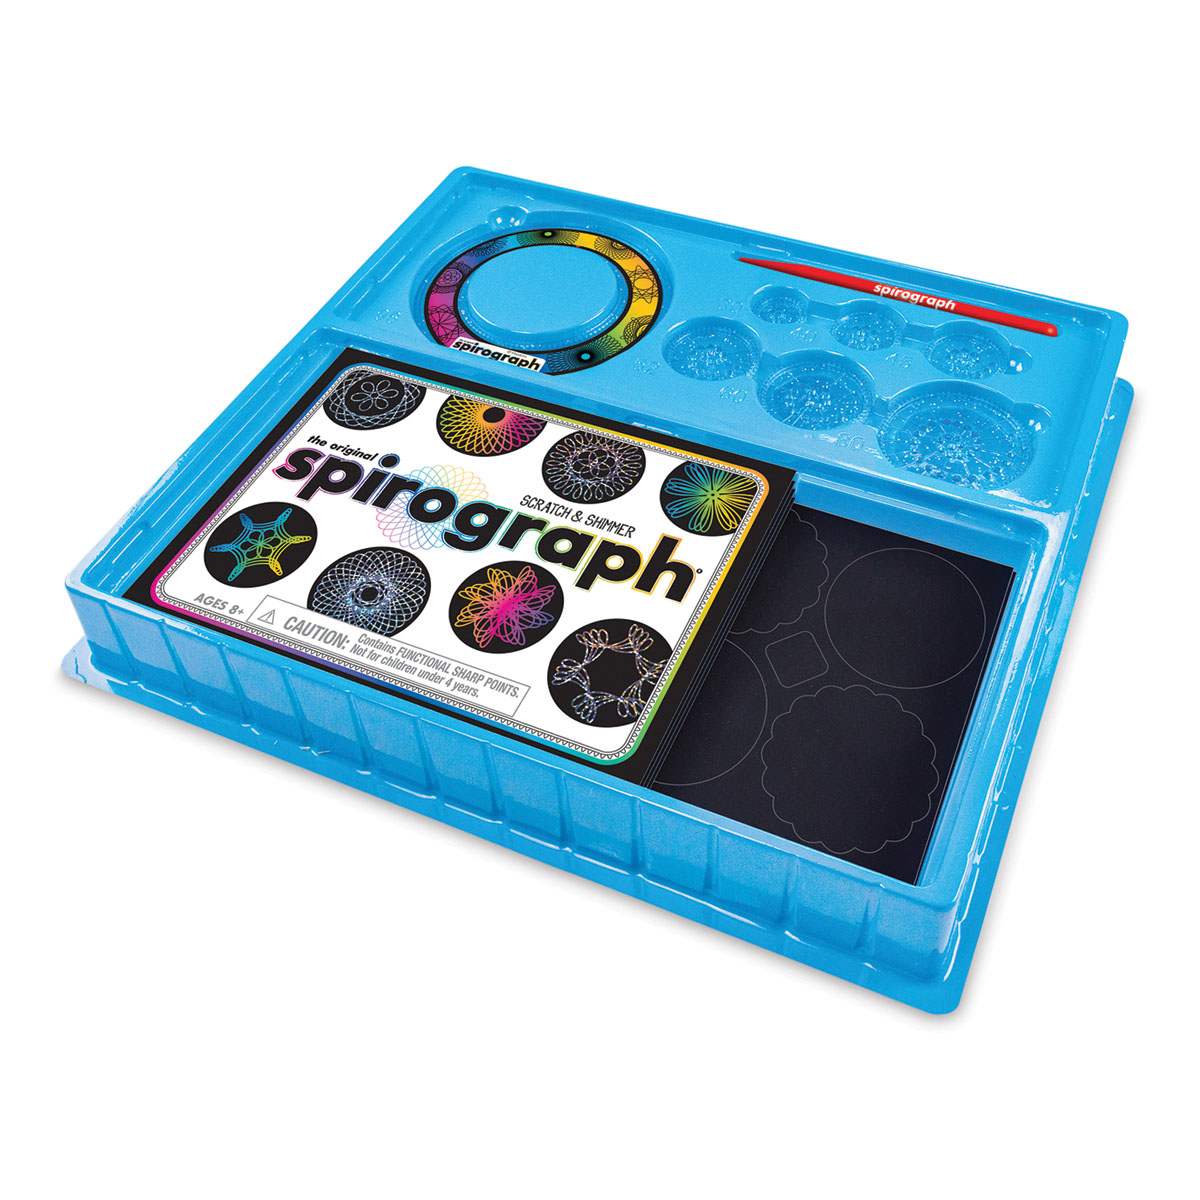 The Spirograph drawing box